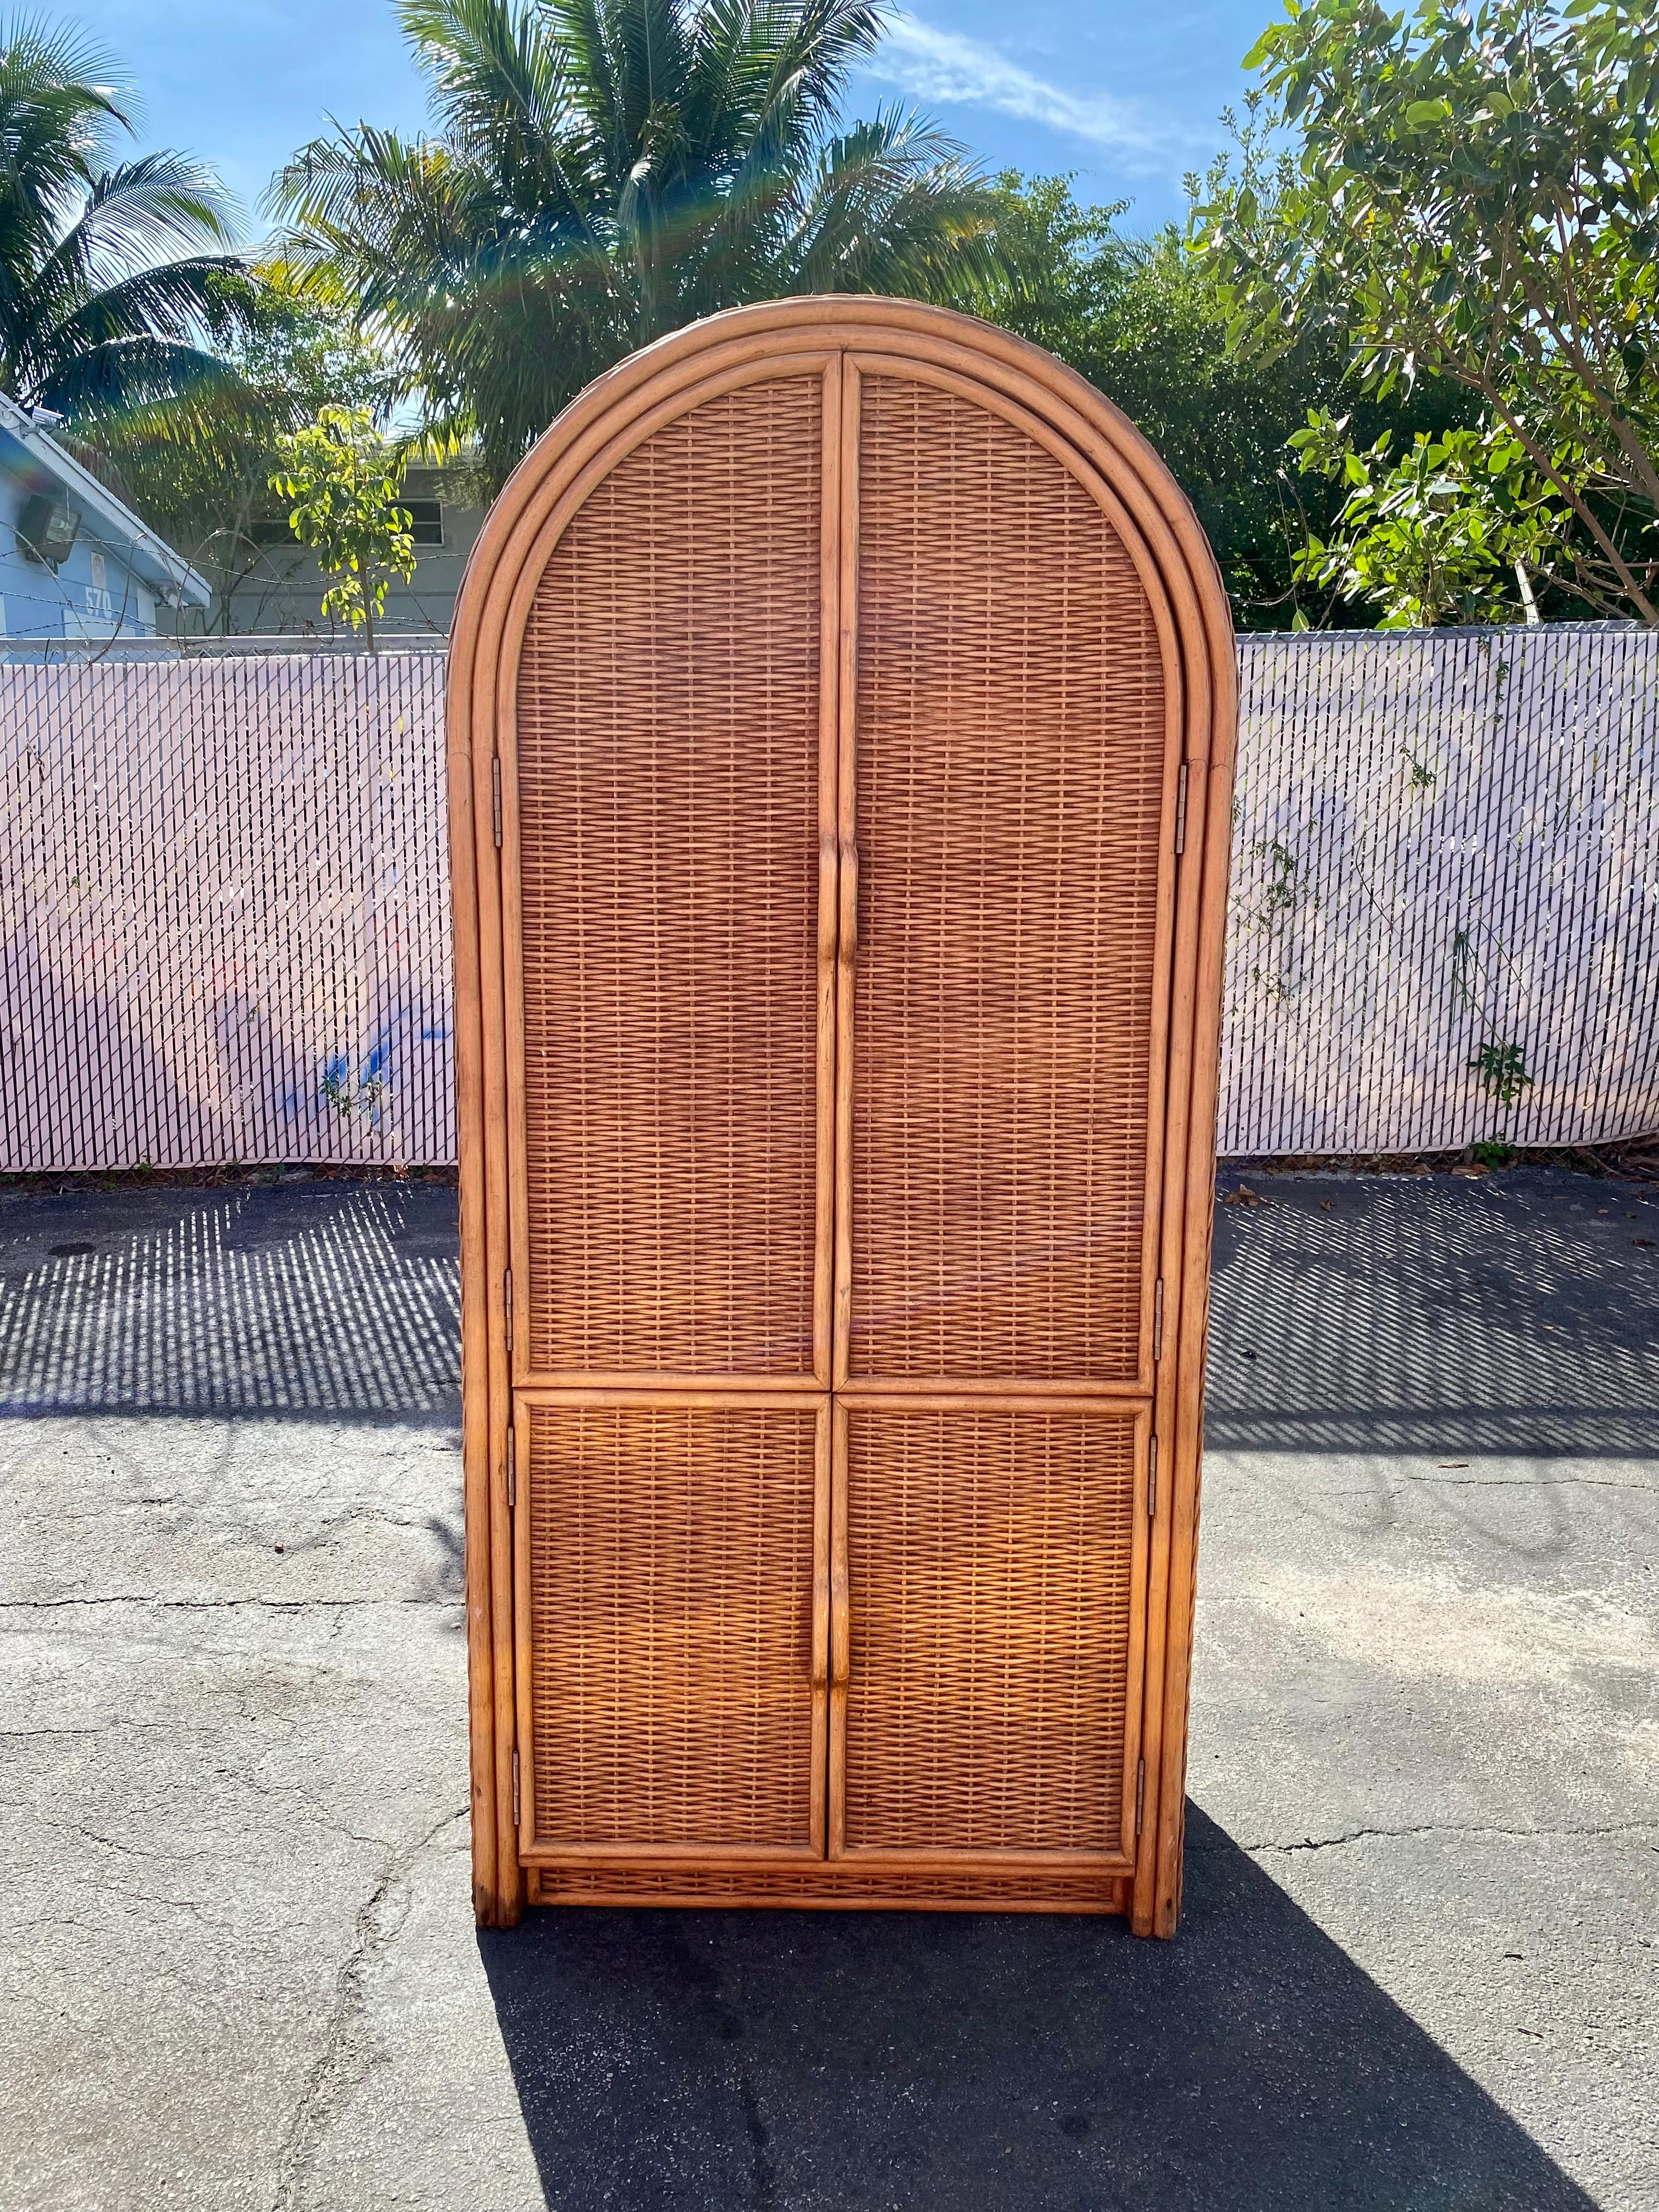 On offer on this occasion is one of the most stunning, rare wardrobe cabinet you could hope to find. Outstanding design is exhibited throughout. The beautiful cabinet is statement piece and packed with personality!! Just look at the gorgeous details